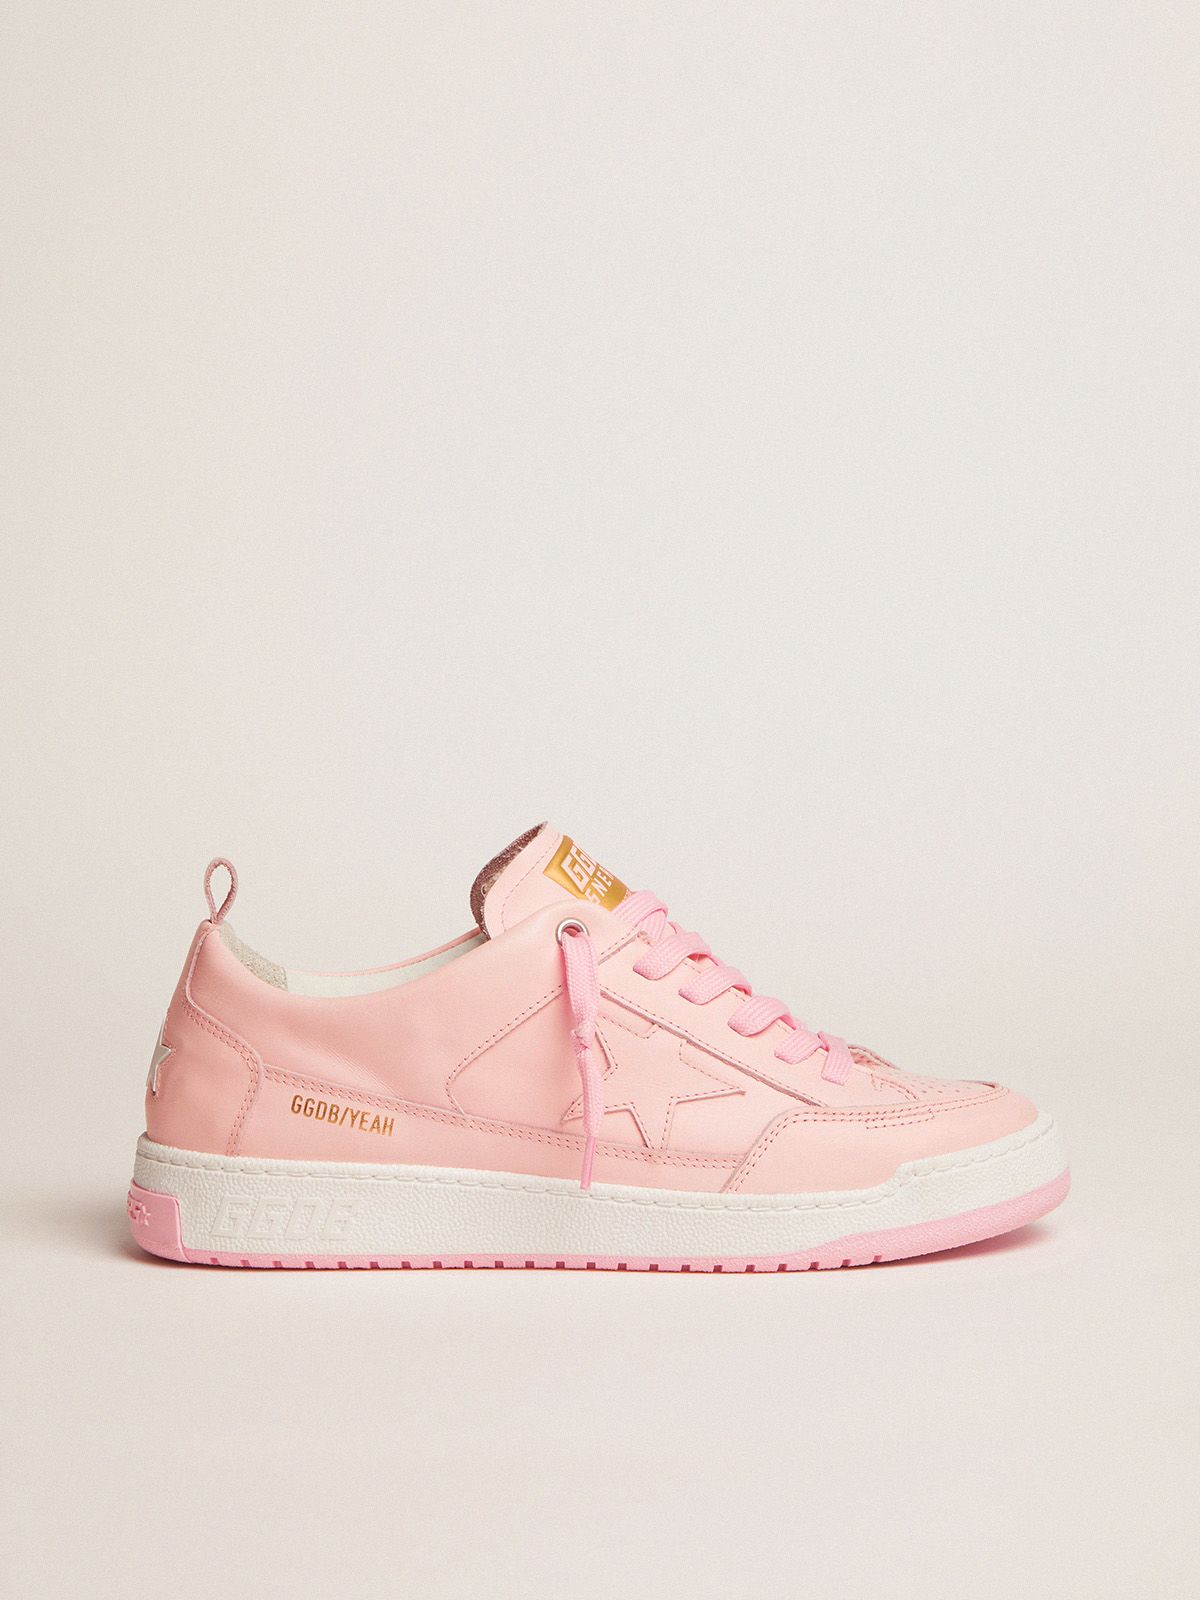 golden goose pink sneakers leather Yeah in pale